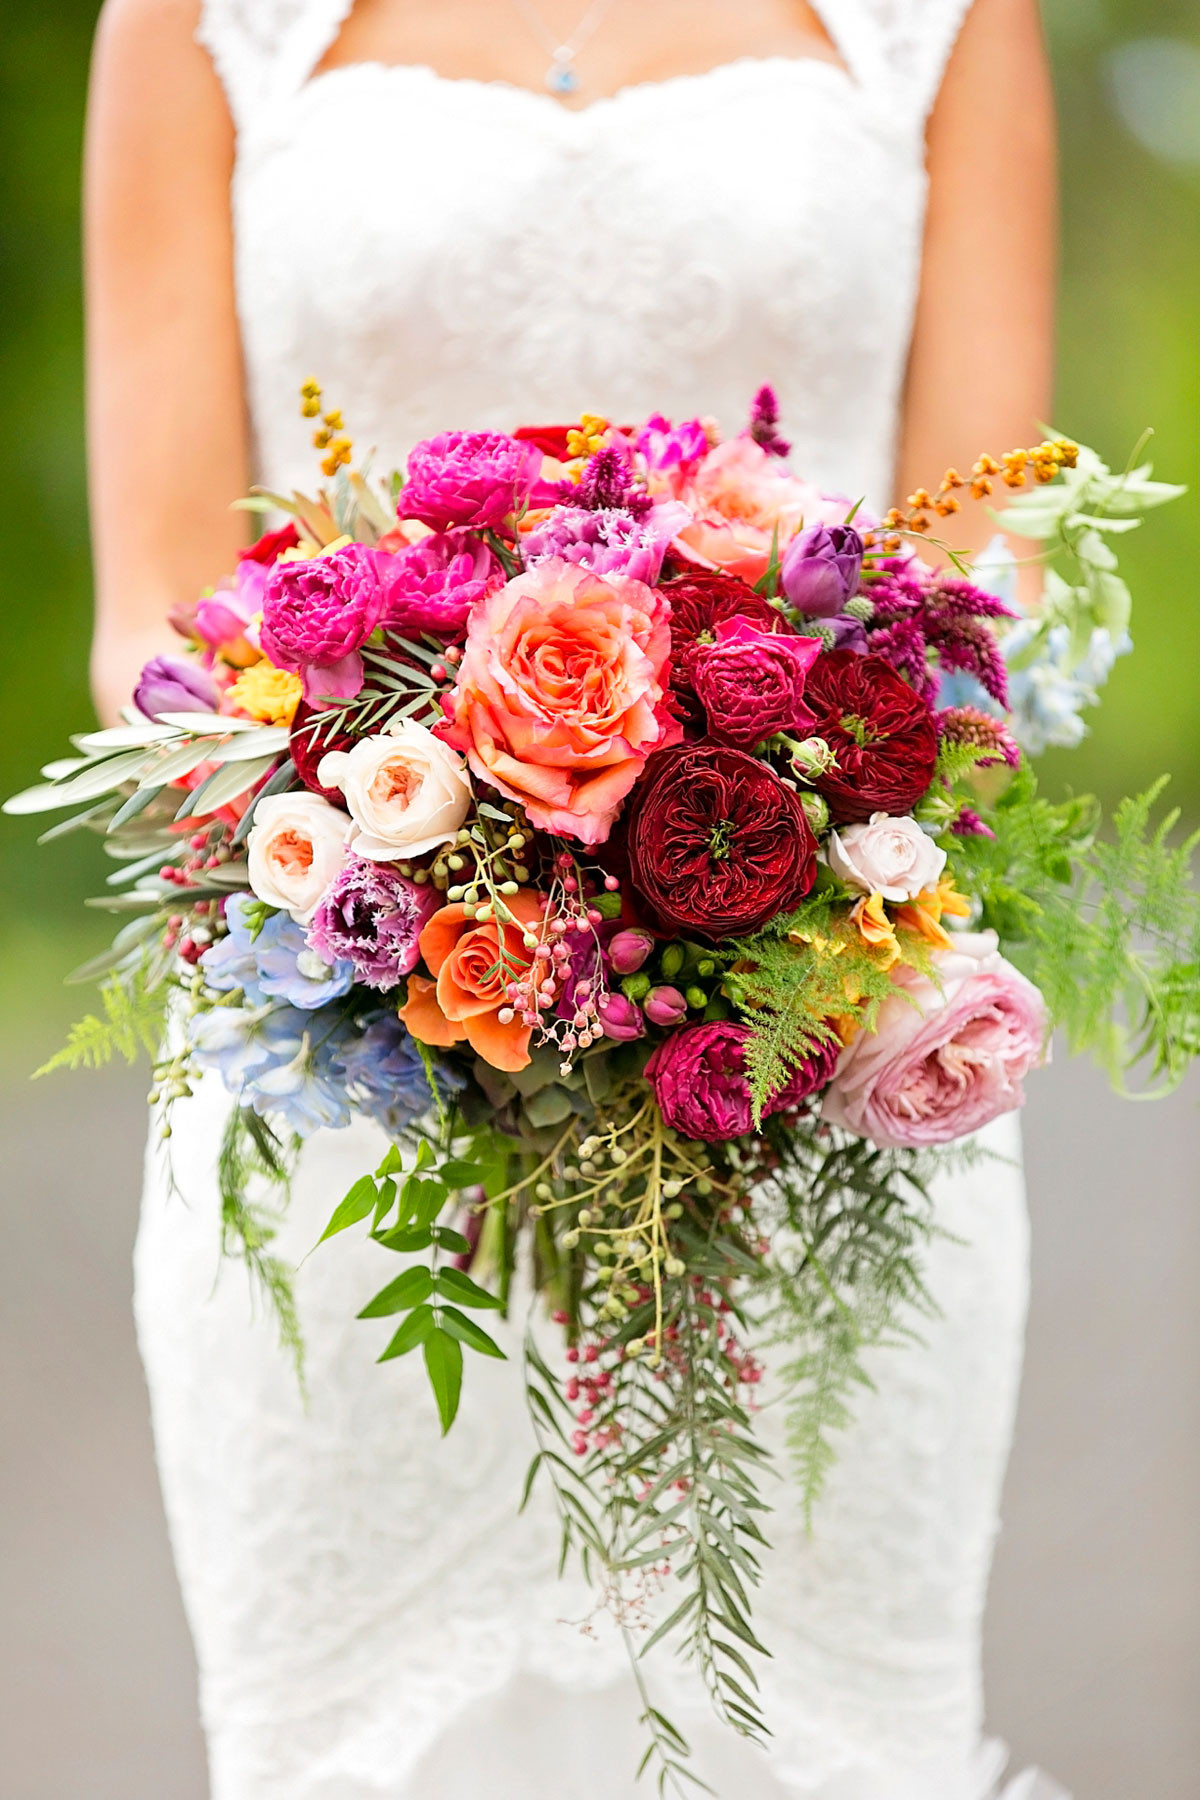 Wedding Flower Pictures
 Autumn Wedding Flowers Guide